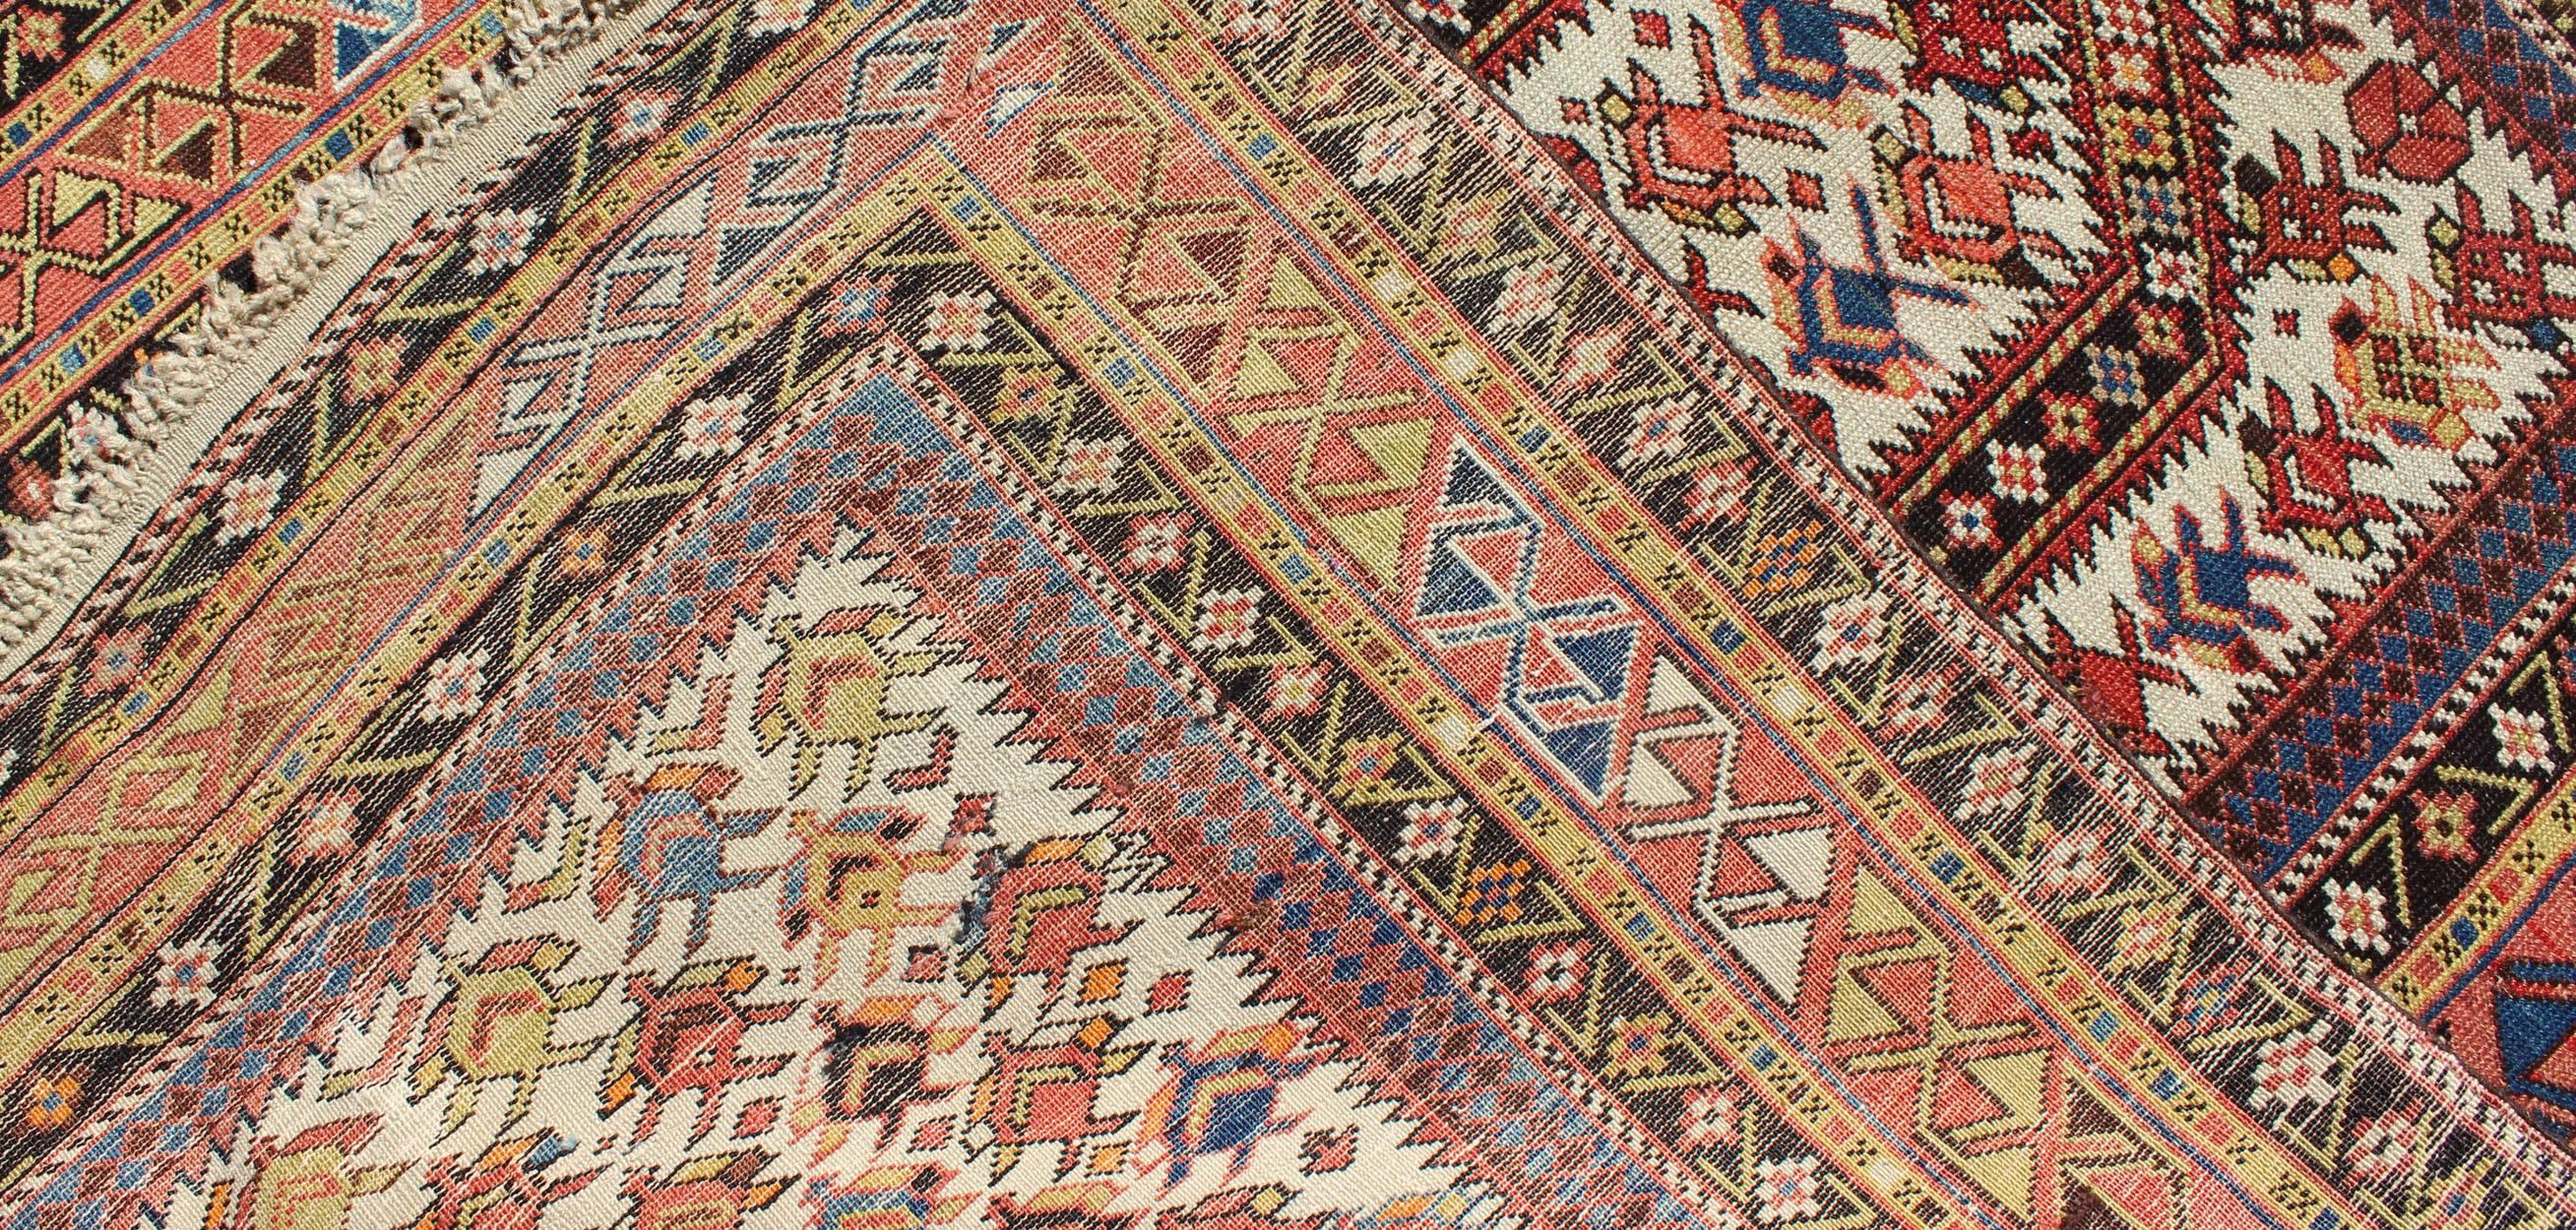 Antique Caucasian Shirvan Rug in Ivory Background, Rust, Yellow, and Dark Brown In Good Condition For Sale In Atlanta, GA